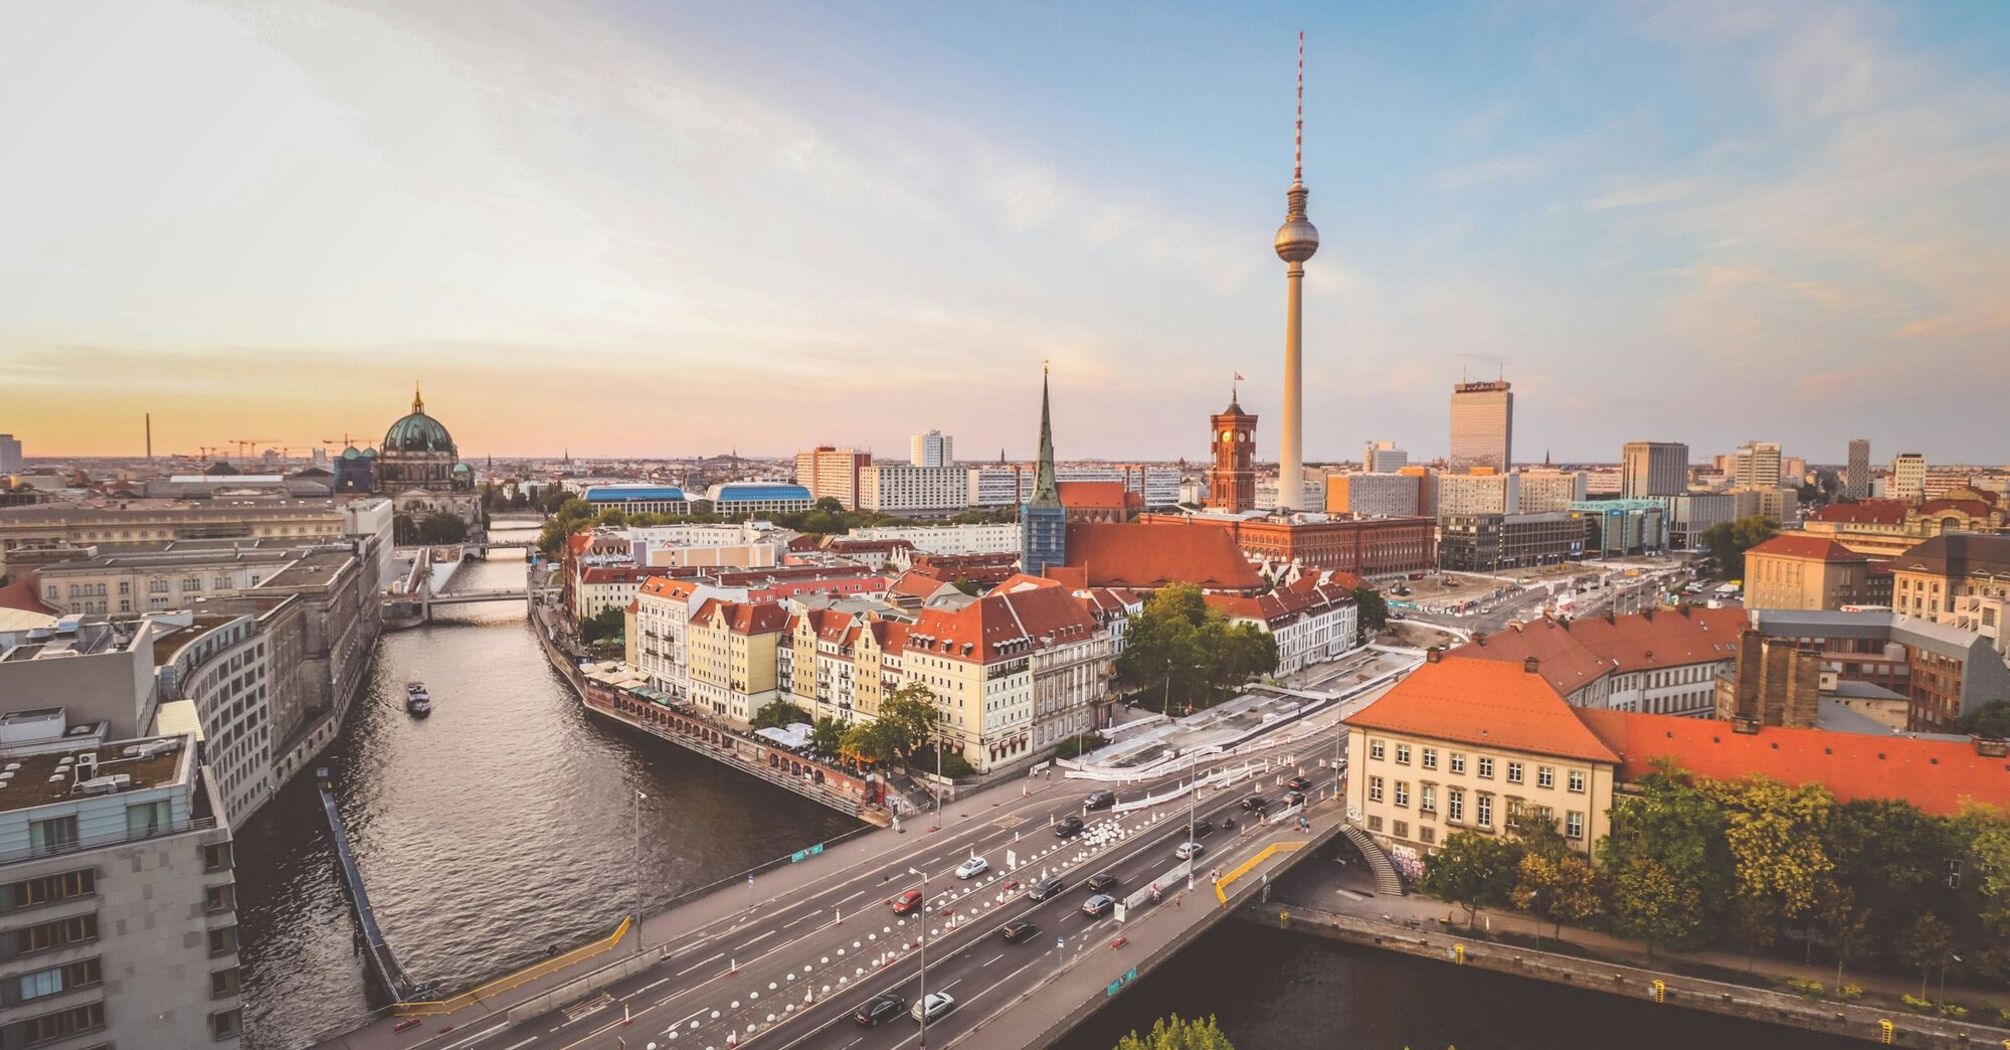 Aerial view of Berlin cityscape at sunset with the Spree River, iconic TV Tower, and distinctive buildings